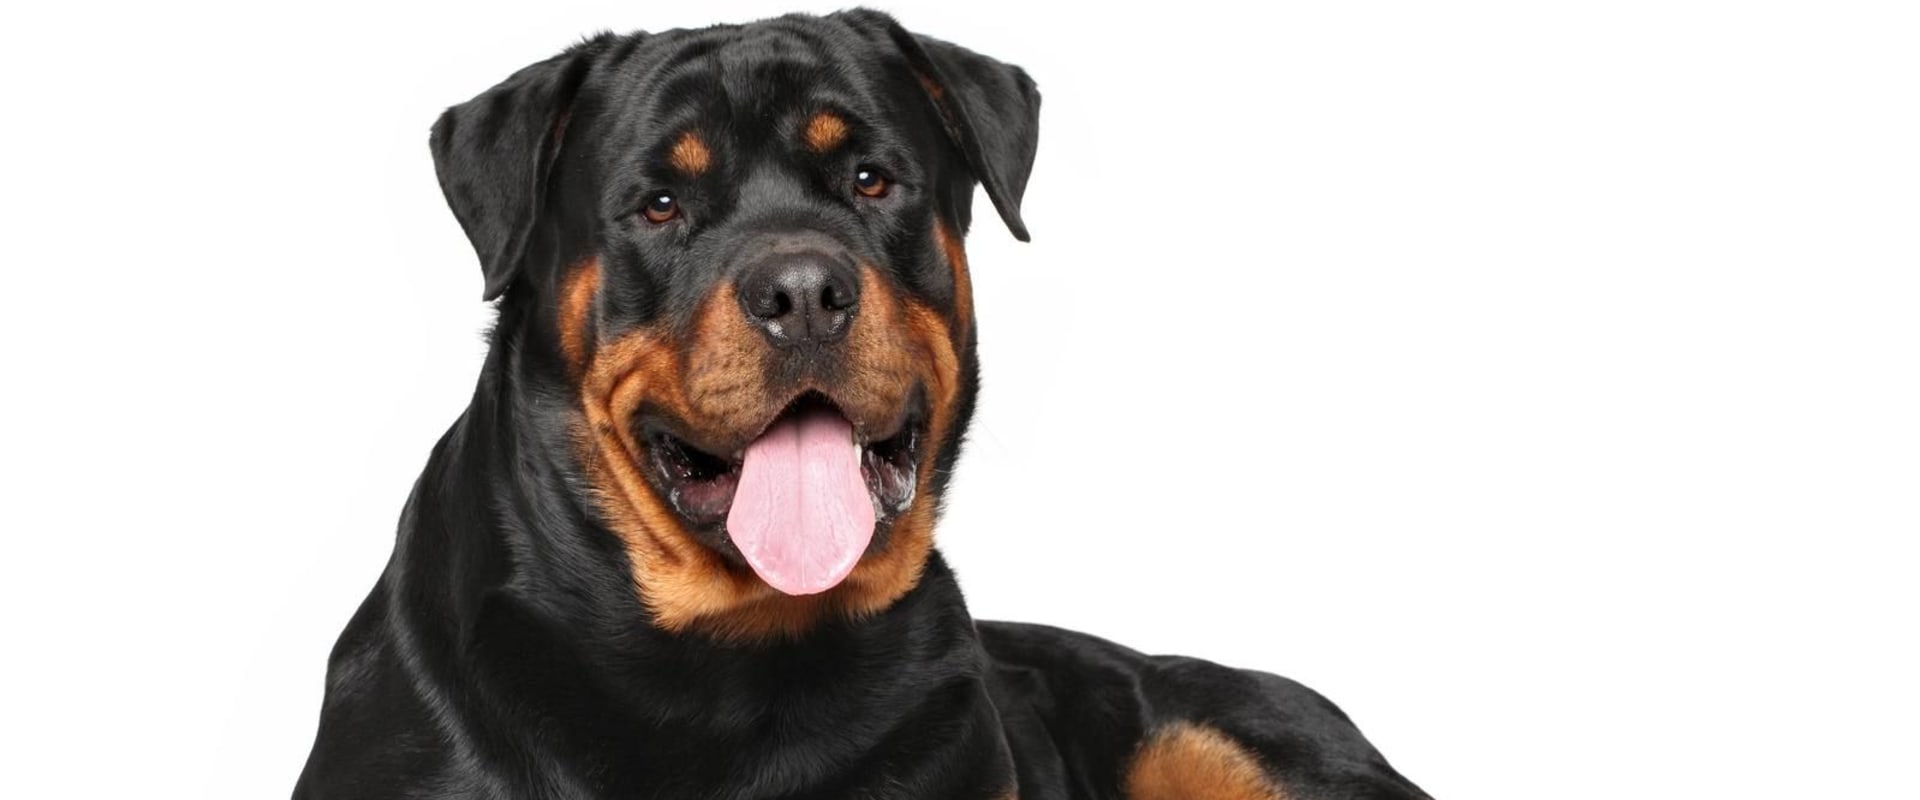 Why is rottweiler so popular?